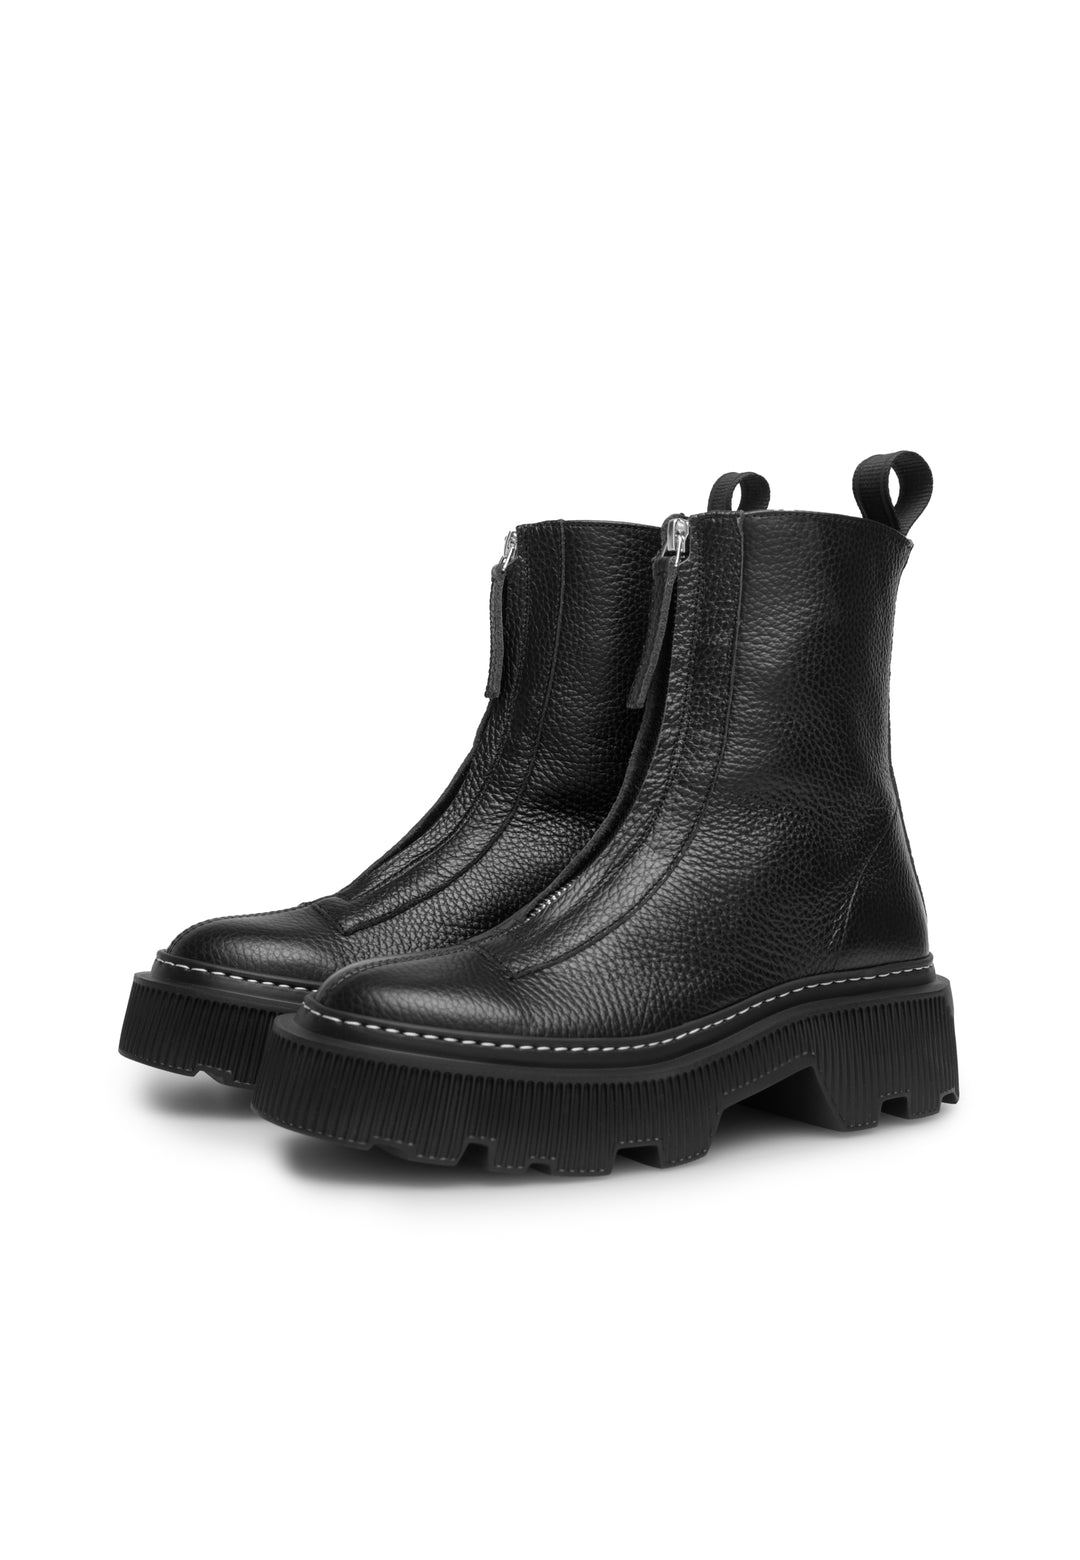 LÄST Shane Zip-Up Boot Ankle Boots Black